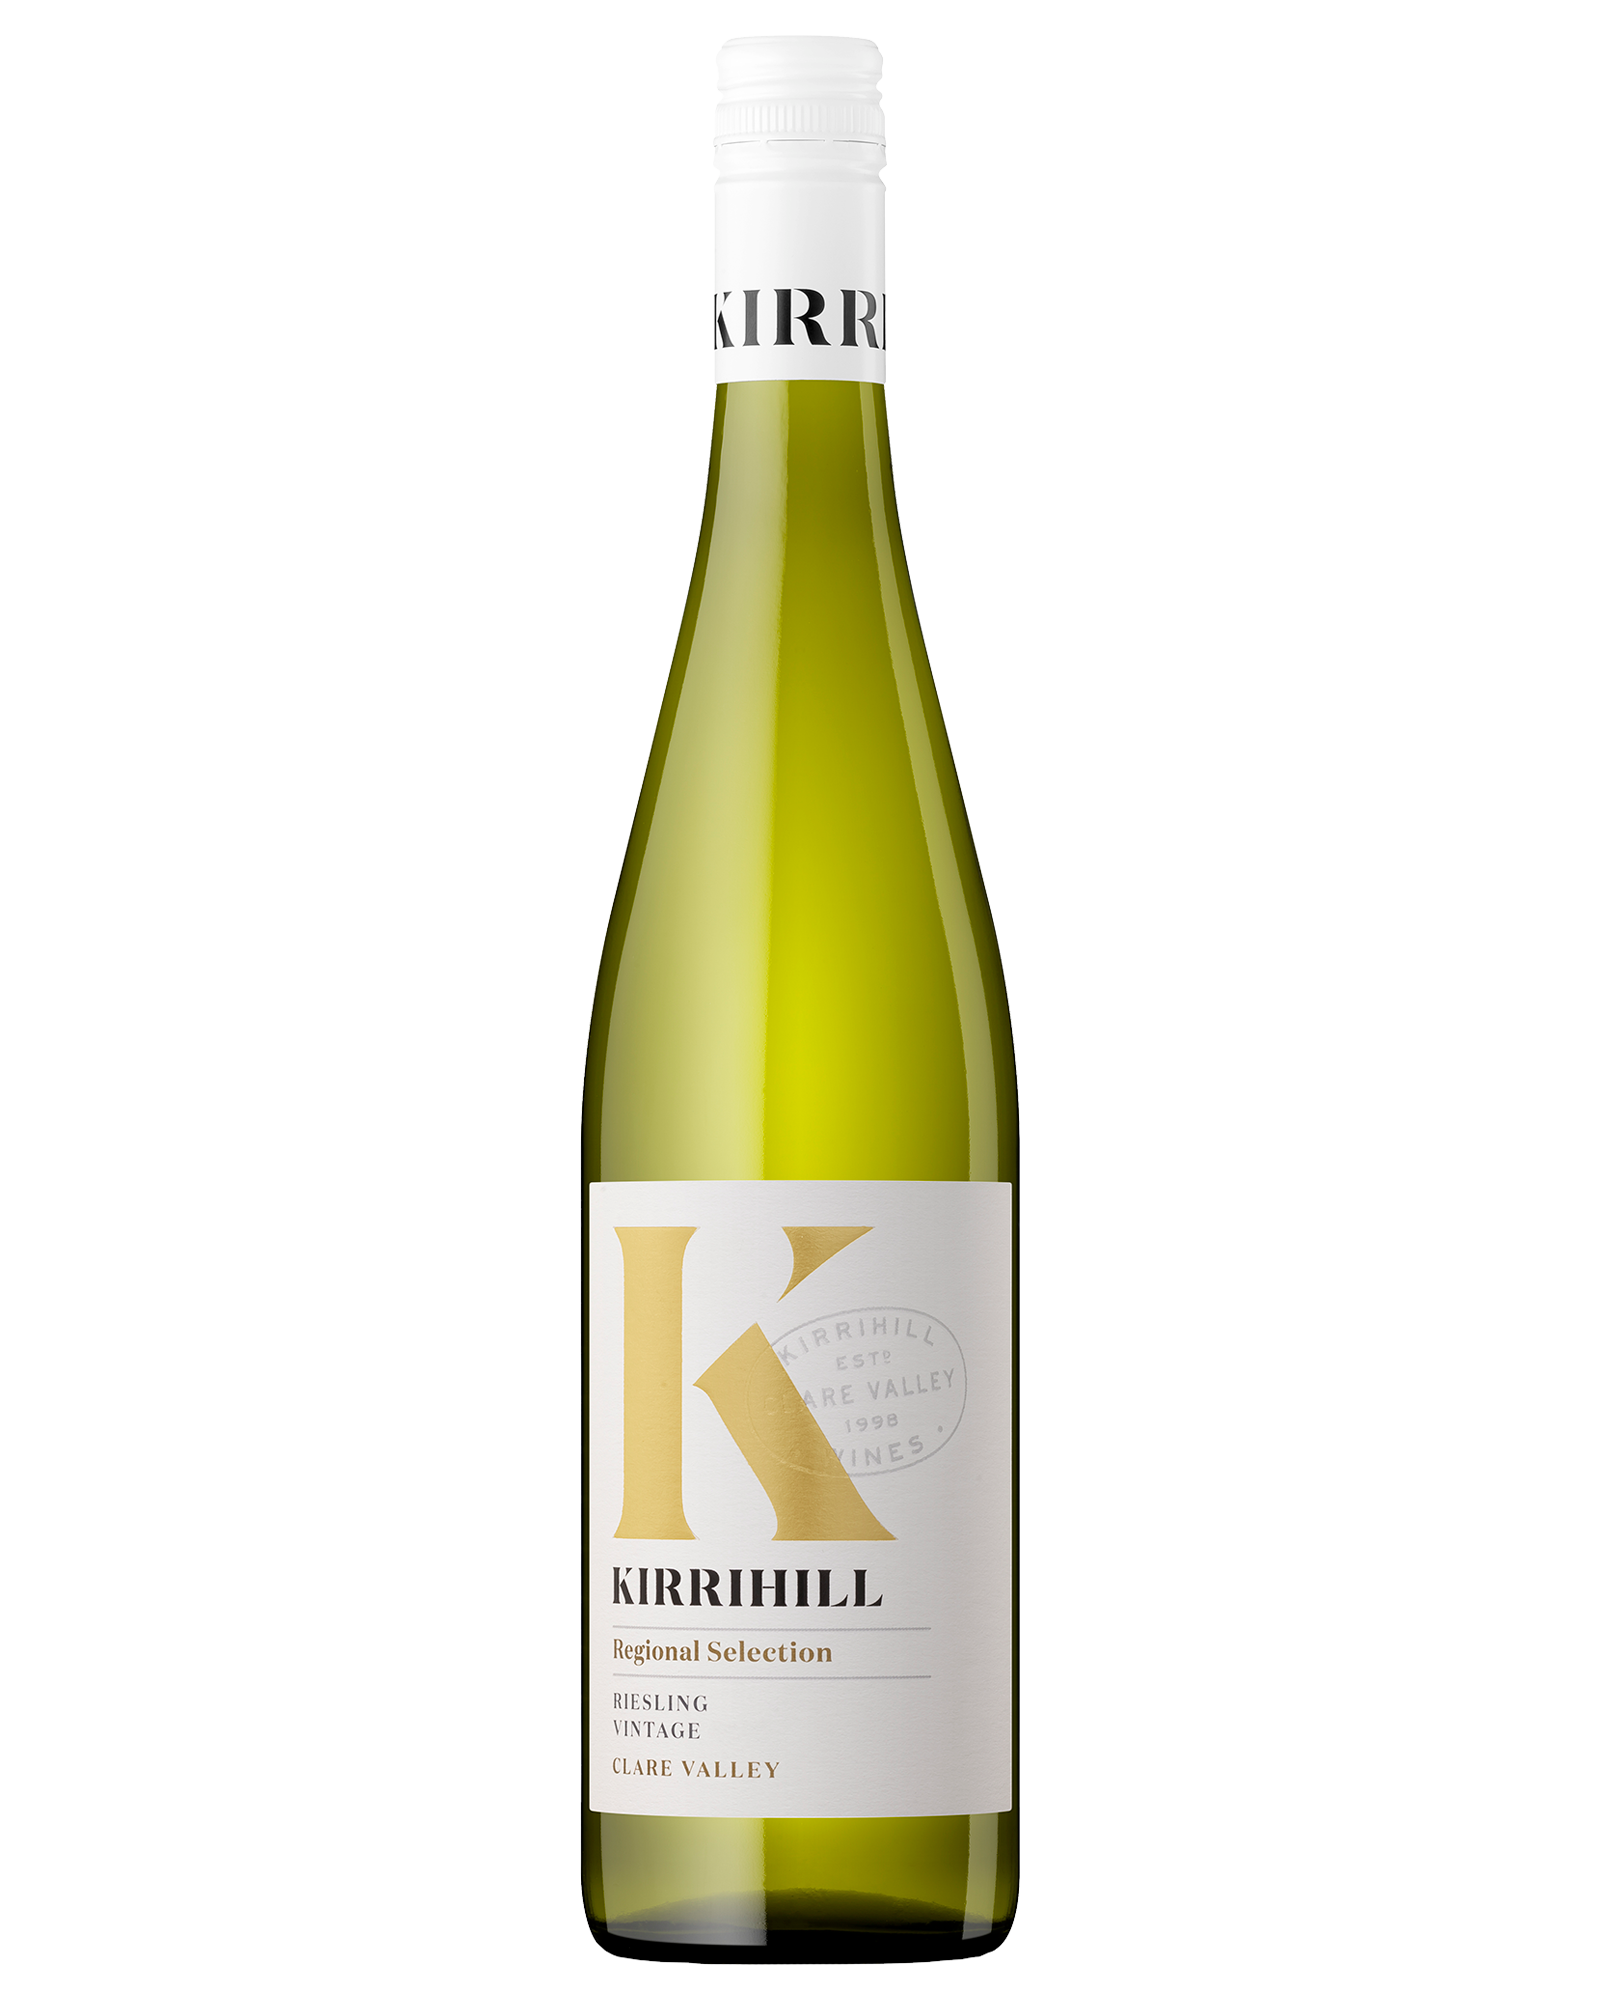 Kirrihill Regional Selection Clare Valley Riesling